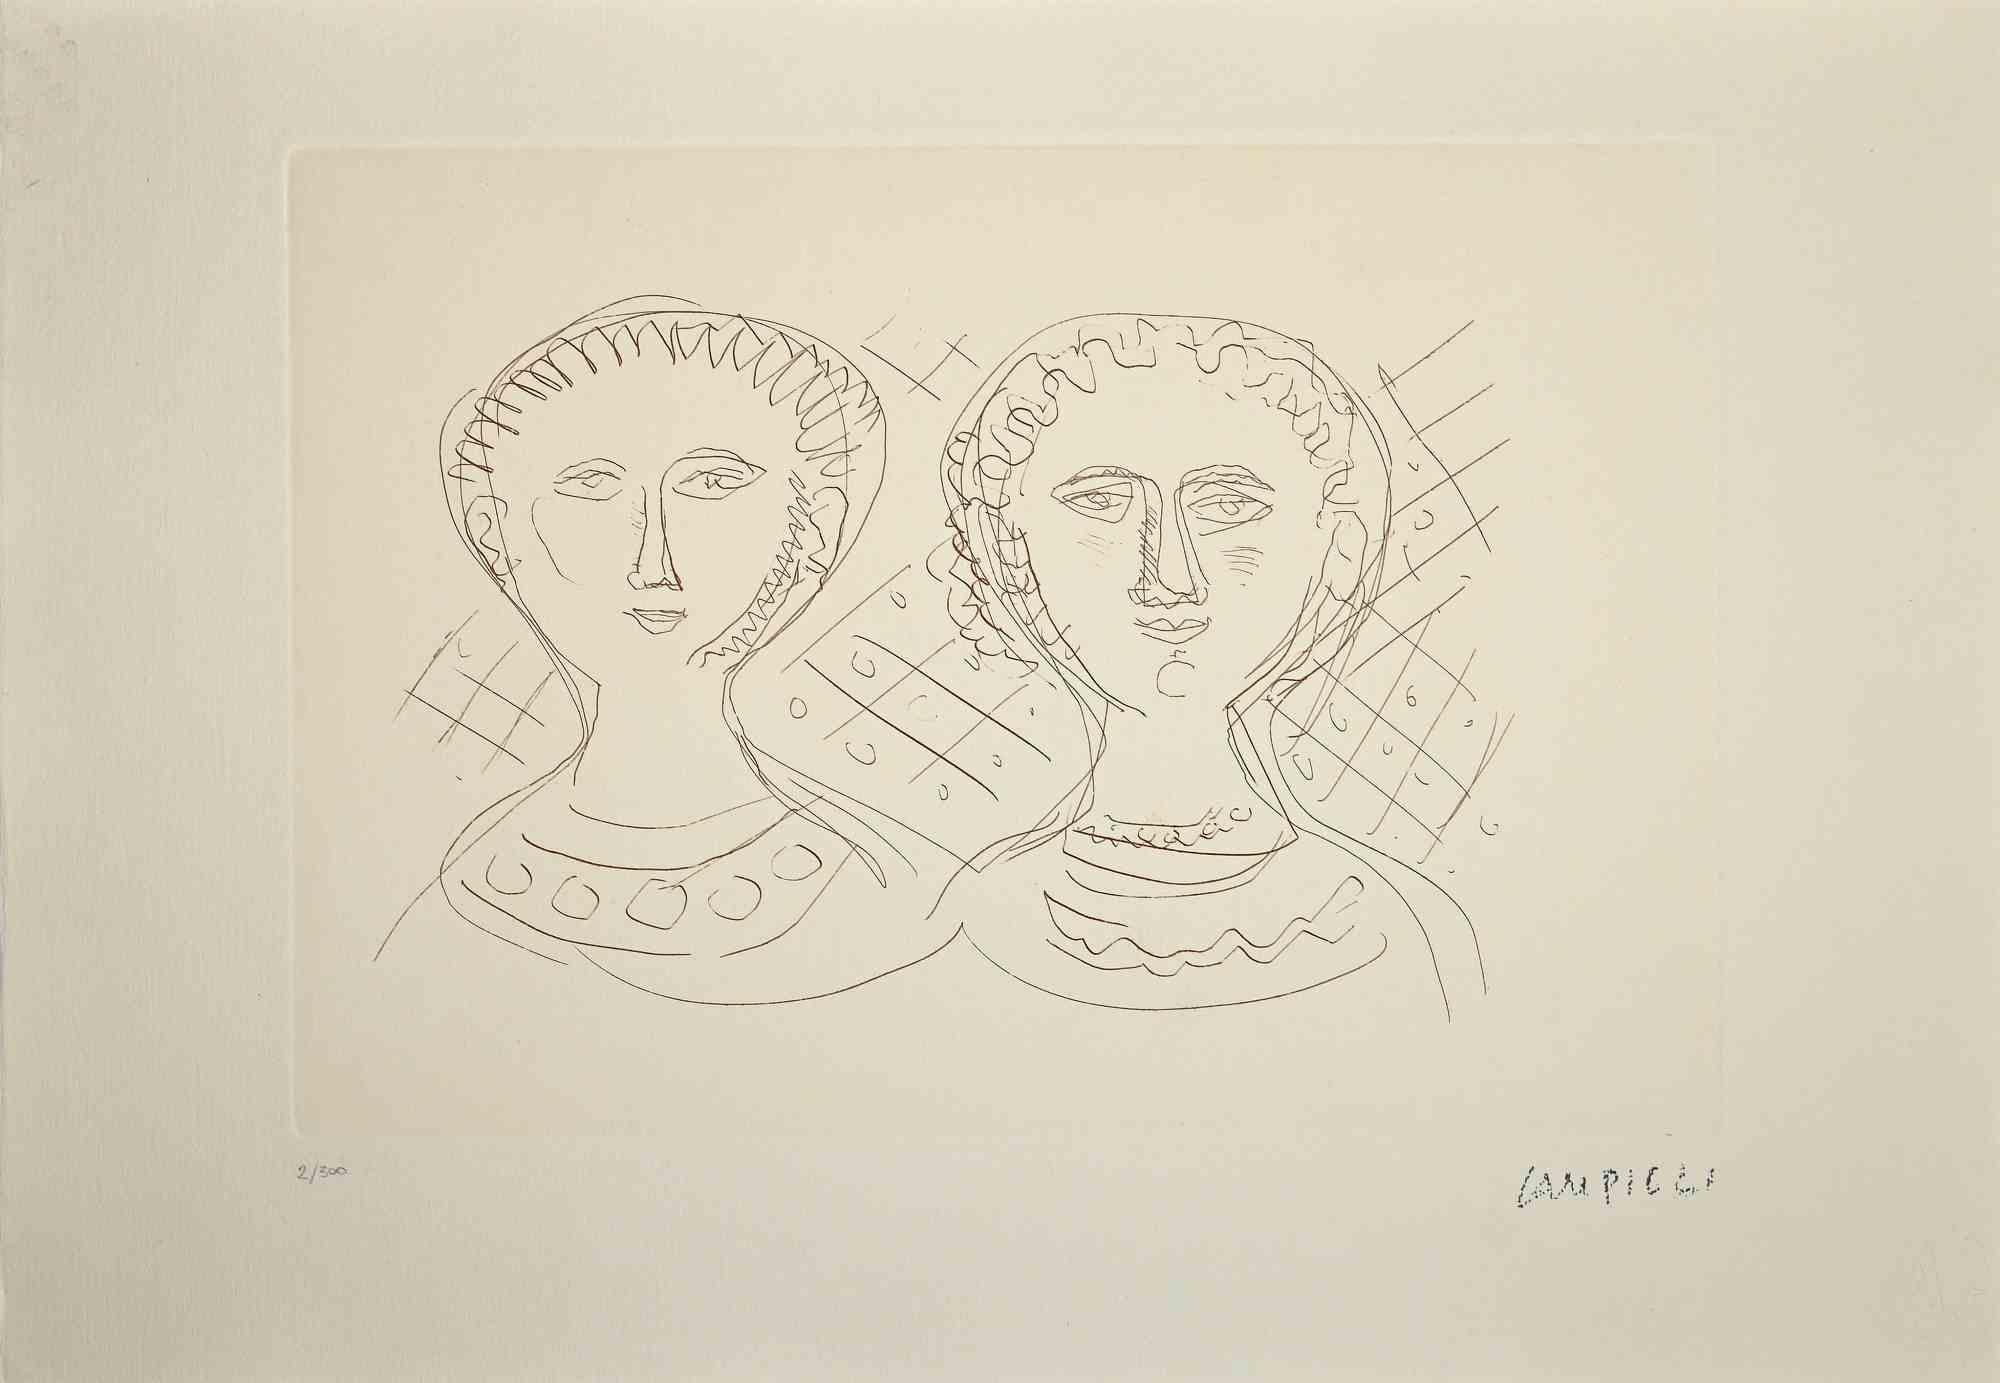 The Two Women - Original Etching by Massimo Campigli - 1970s